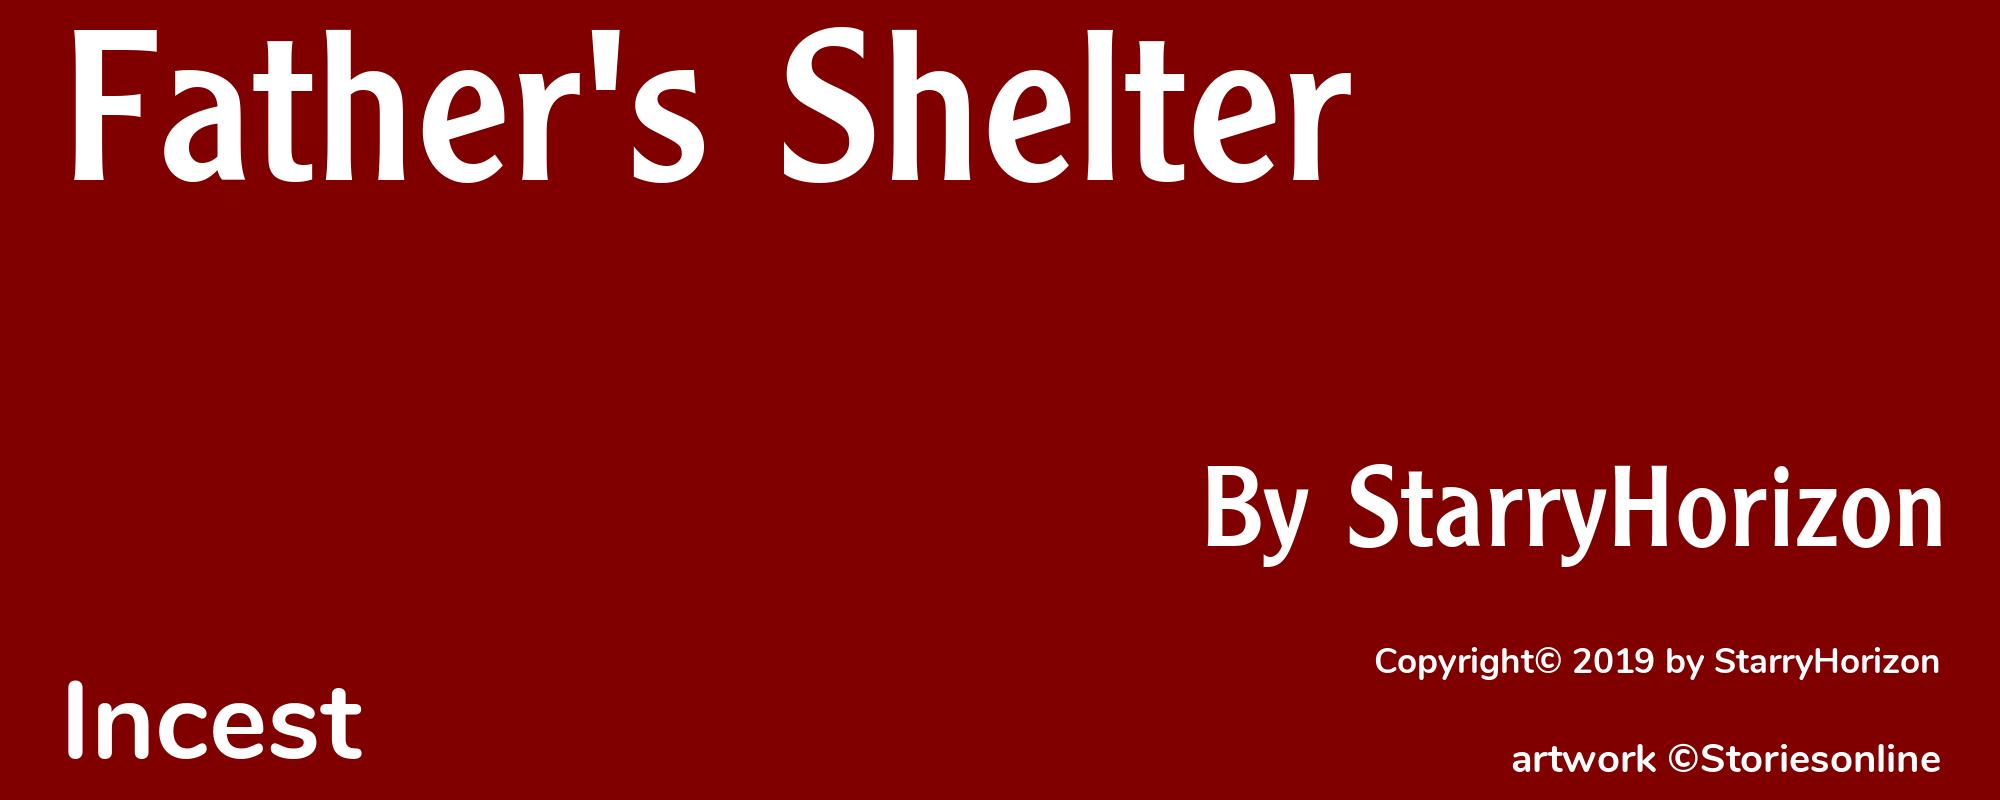 Father's Shelter - Cover